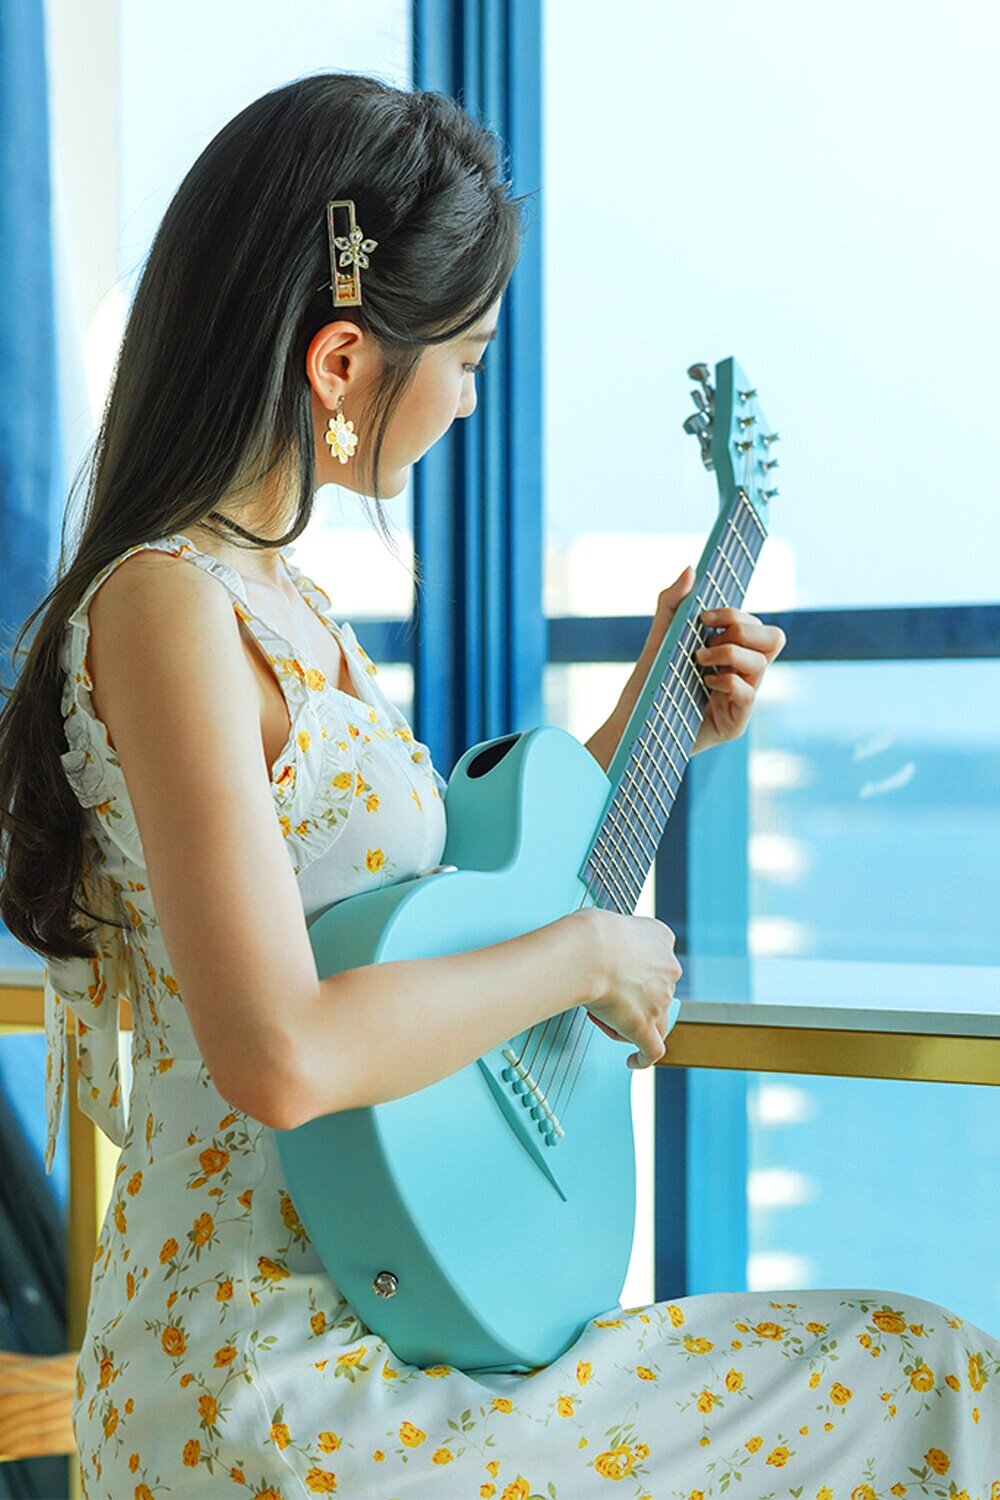 Light weighted and convenient! - With advanced acoustic carbon fiber technology, the NOVA GO is only 33 inches in length, 88mm at its thickest point, and the weight is 1.8 KG. it is the lightest acoustic guitar that Enya has ever designed.88mm, 33 inches, 1.8 kg